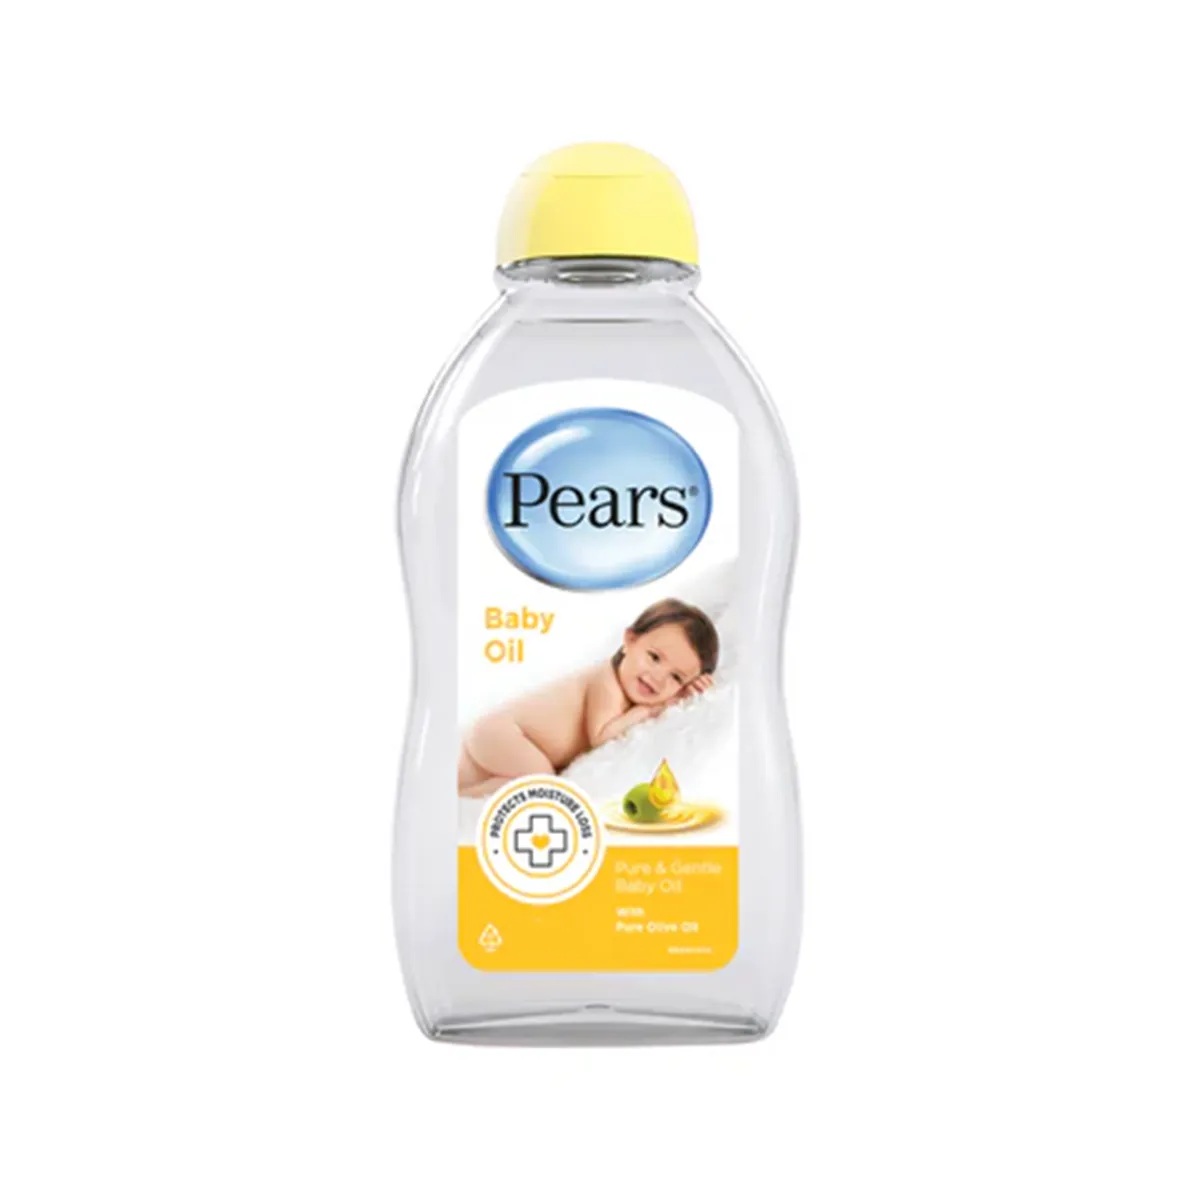 Pears Pure and Gentle Baby Oil 100ml